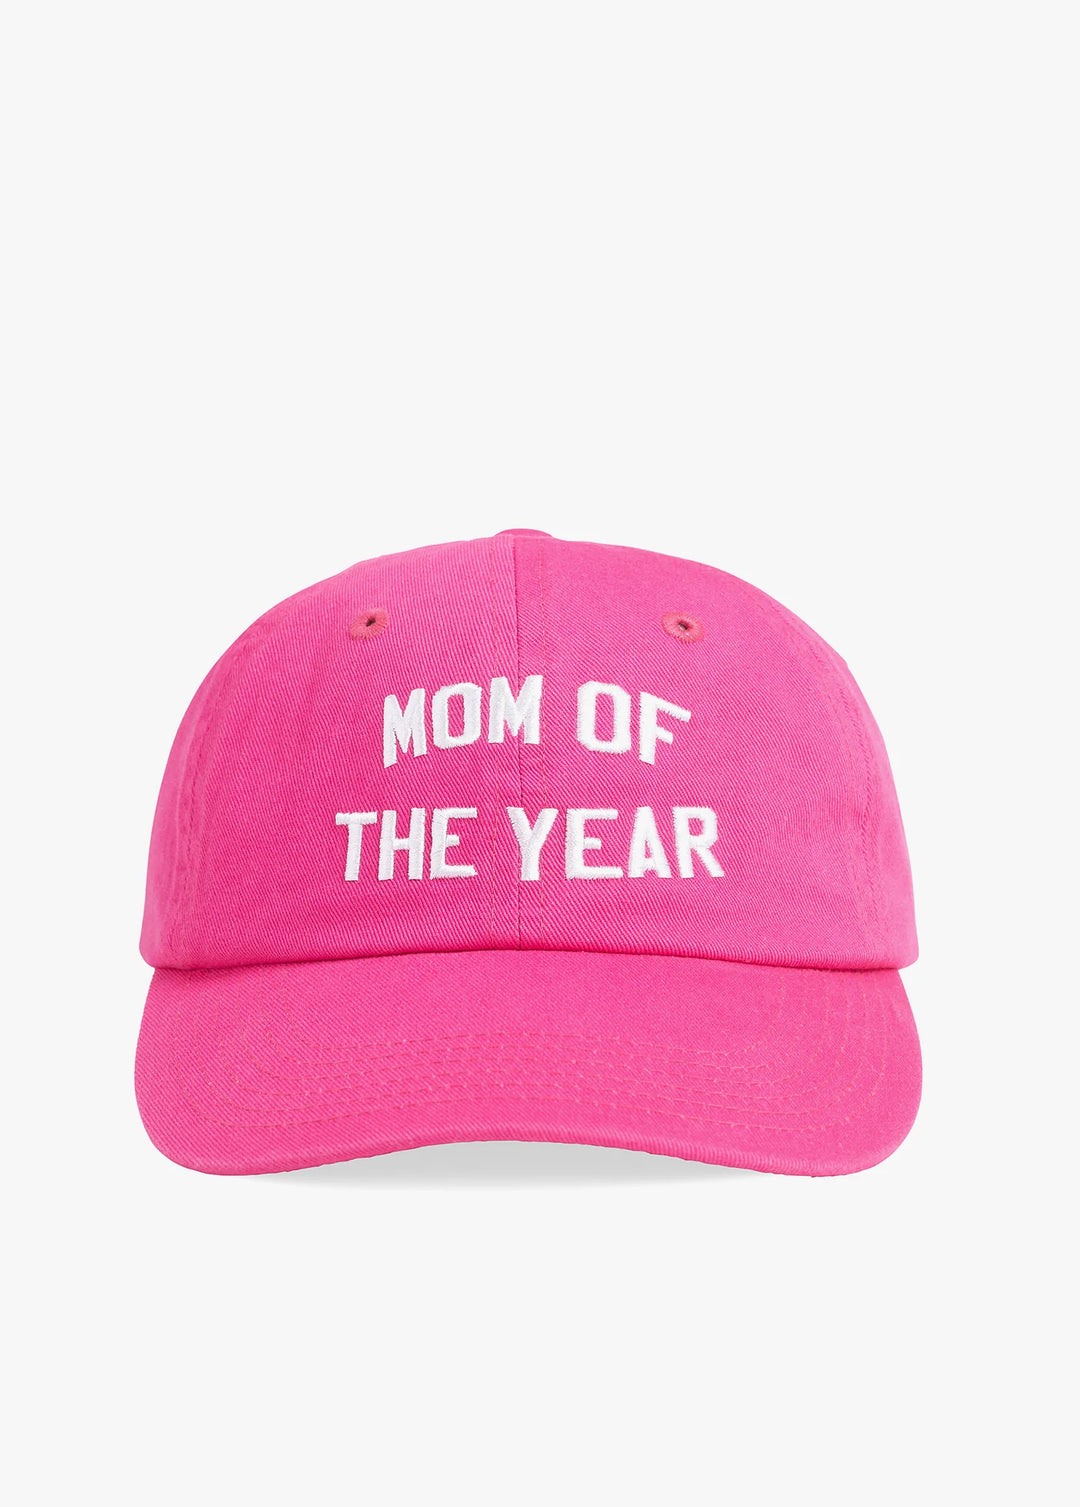 MOM OF THE YEAR BASEBALL HAT